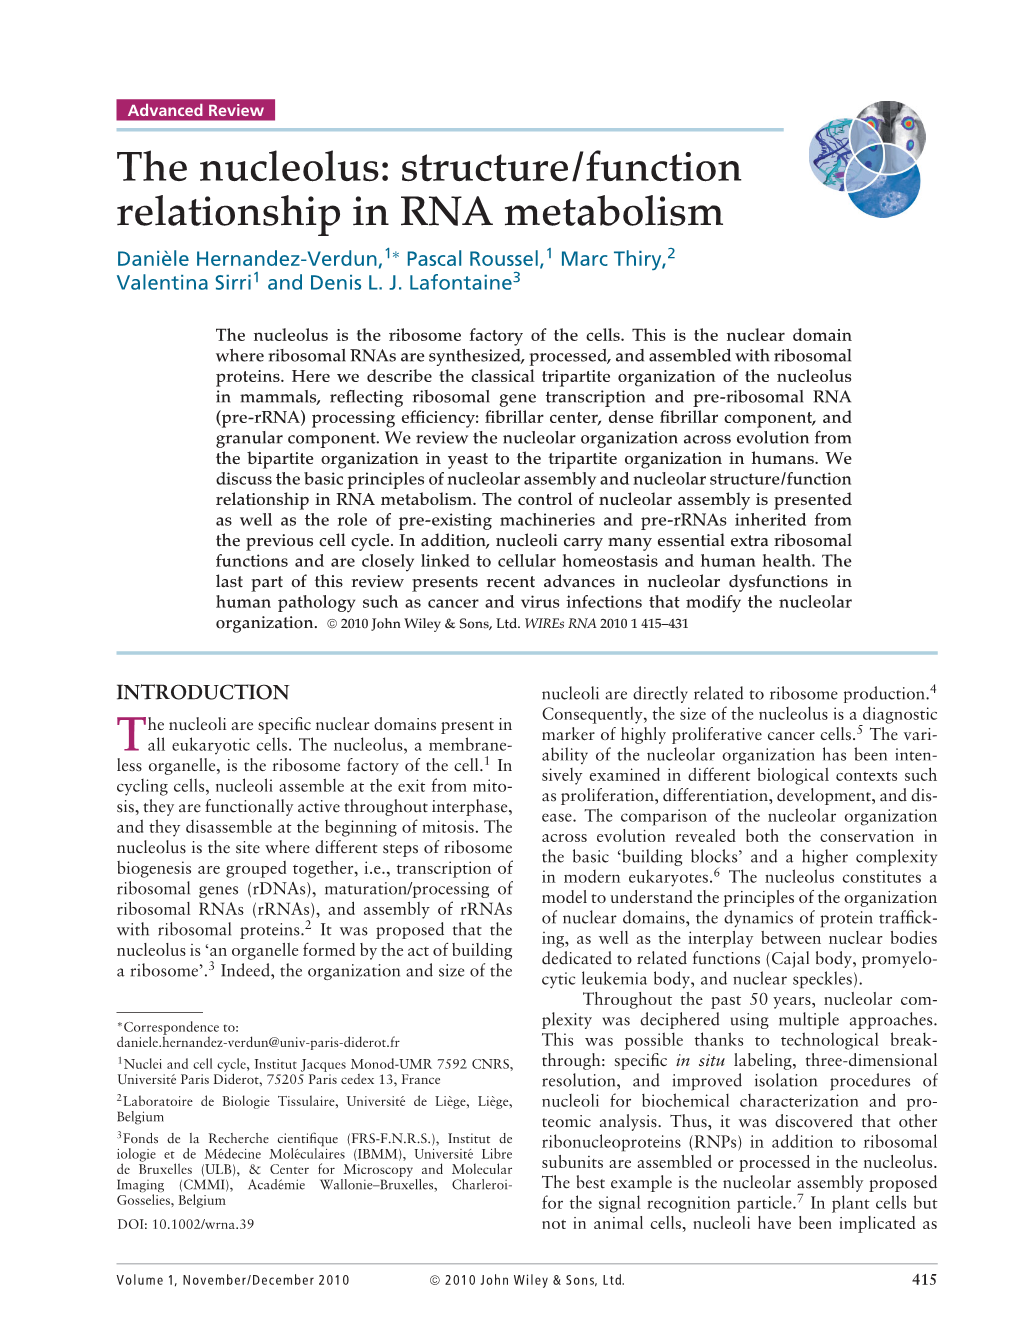 The Nucleolus: Structure/Function Relationship in RNA Metabolism 1 1 2 Daniele` Hernandez-Verdun, ∗ Pascal Roussel, Marc Thiry, Valentina Sirri1 and Denis L